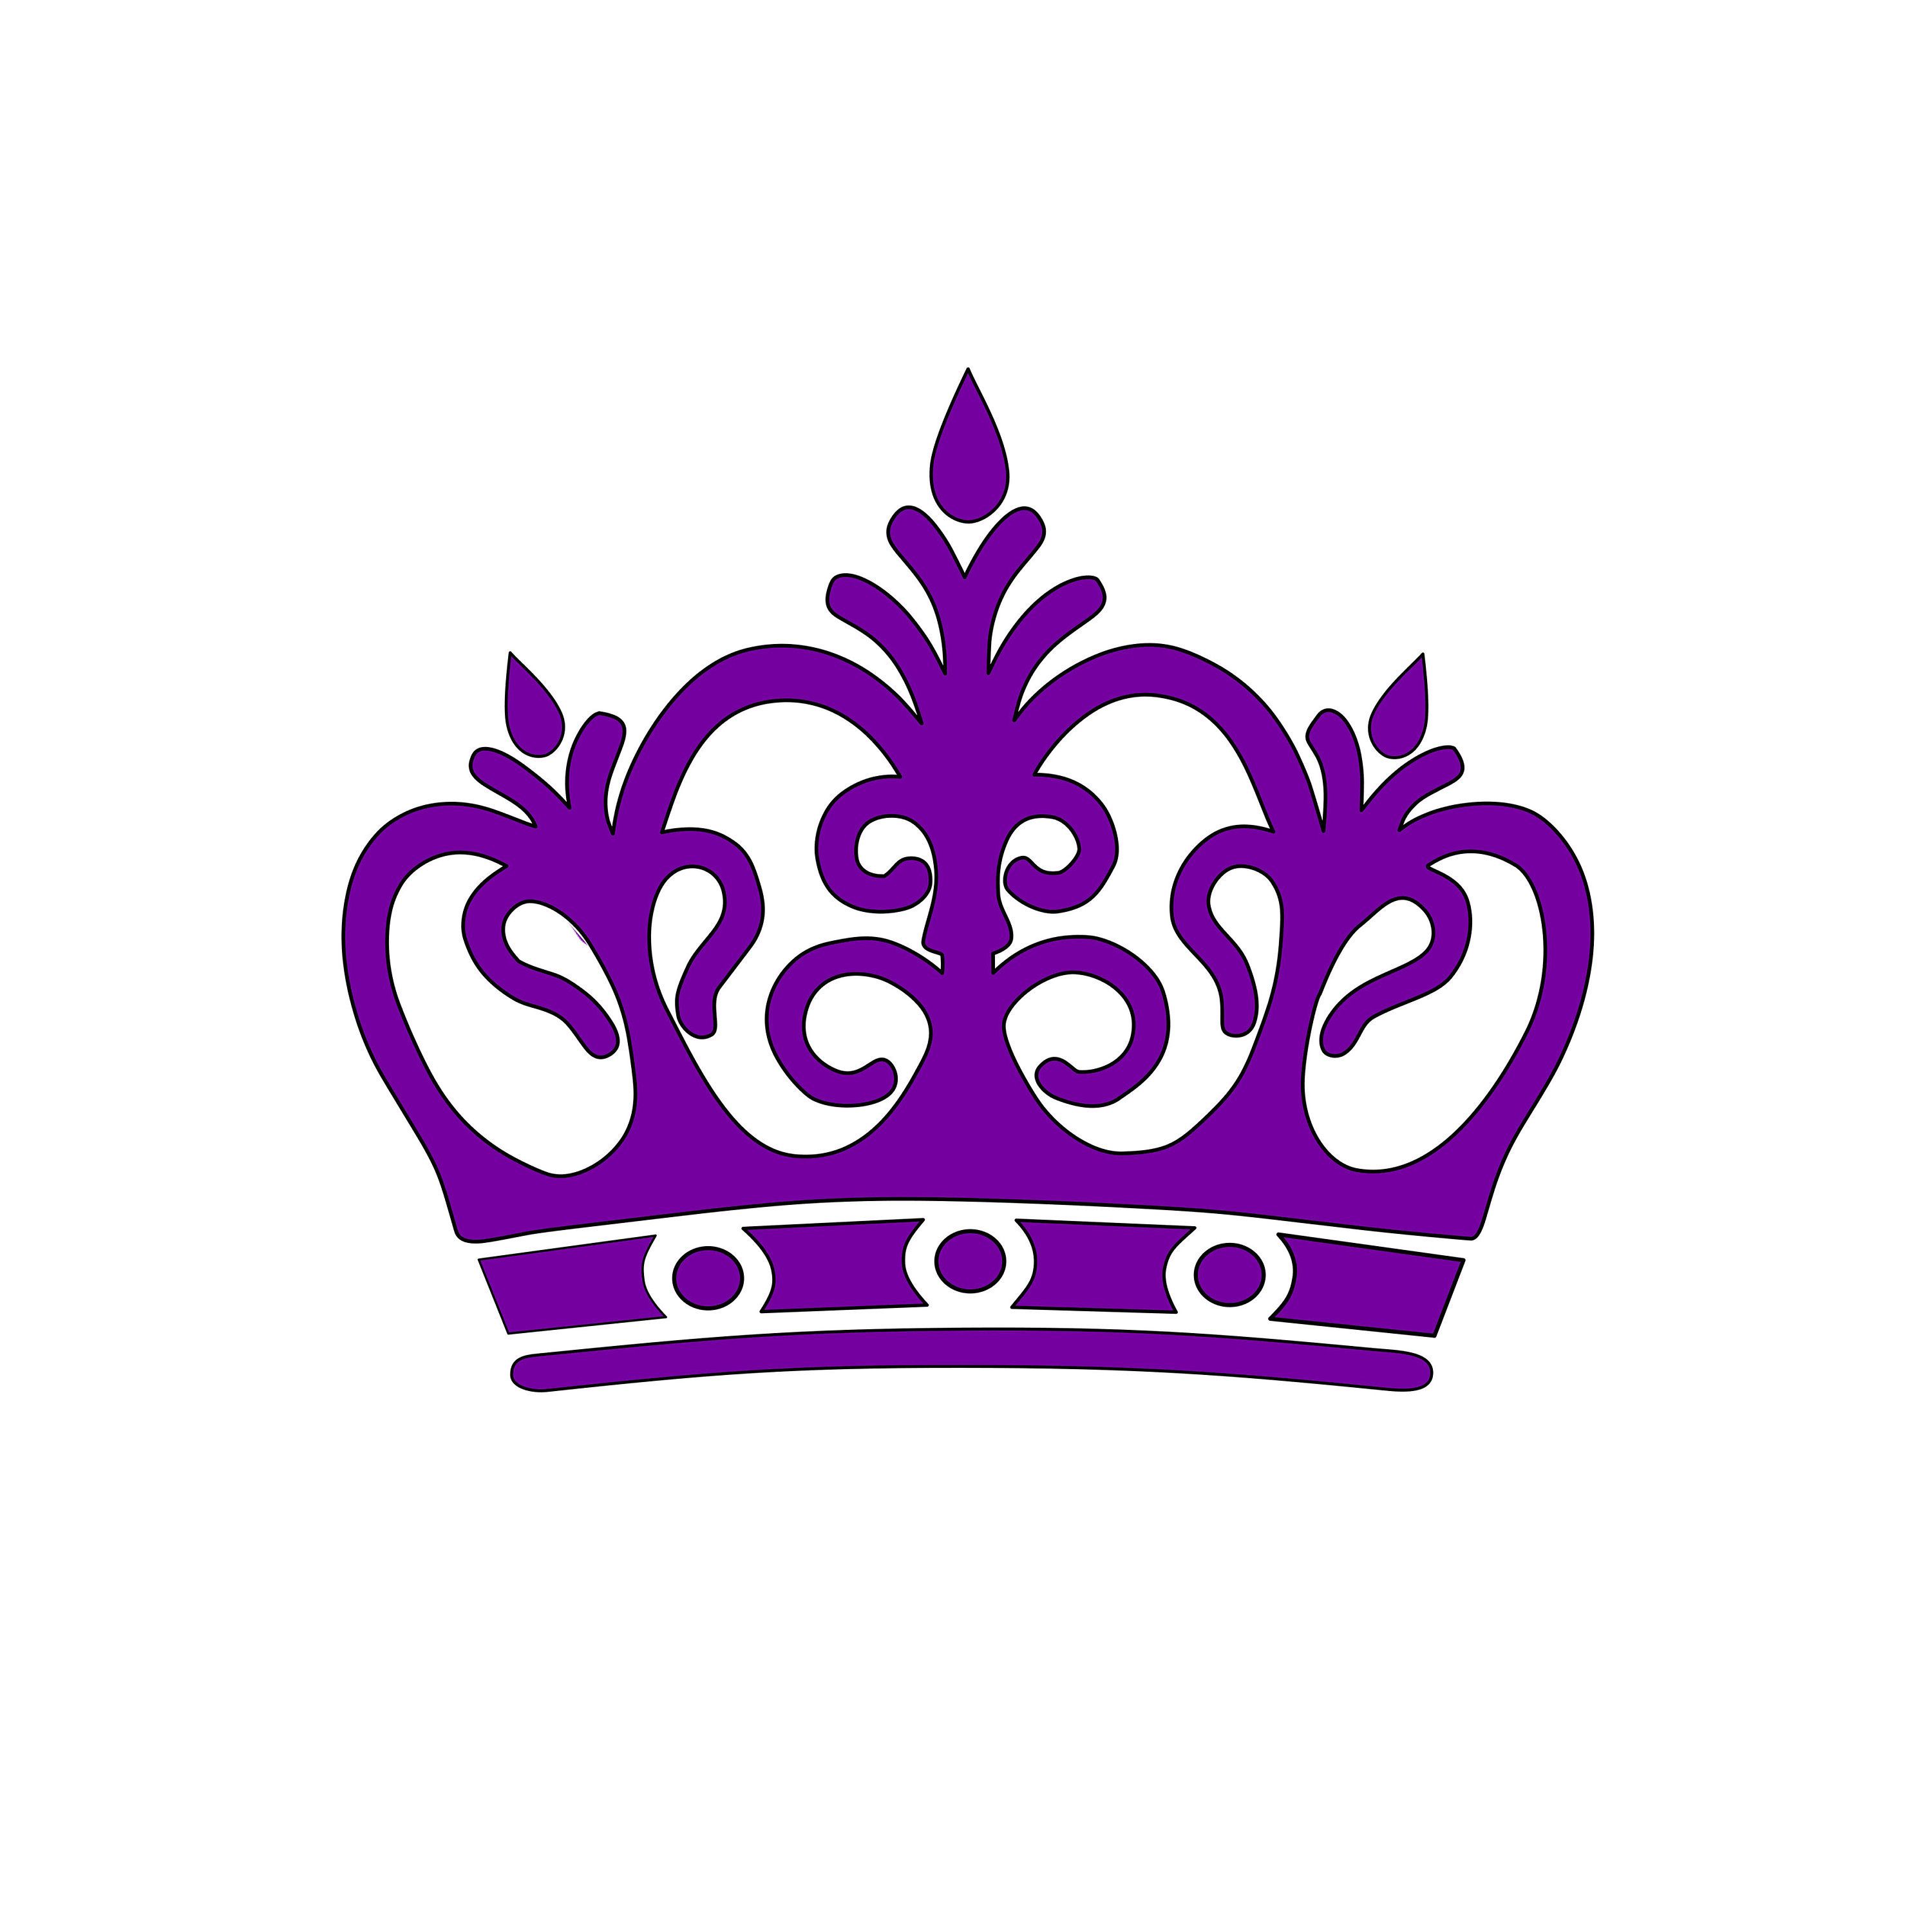 Download Crowns clipart jpeg, Crowns jpeg Transparent FREE for ...